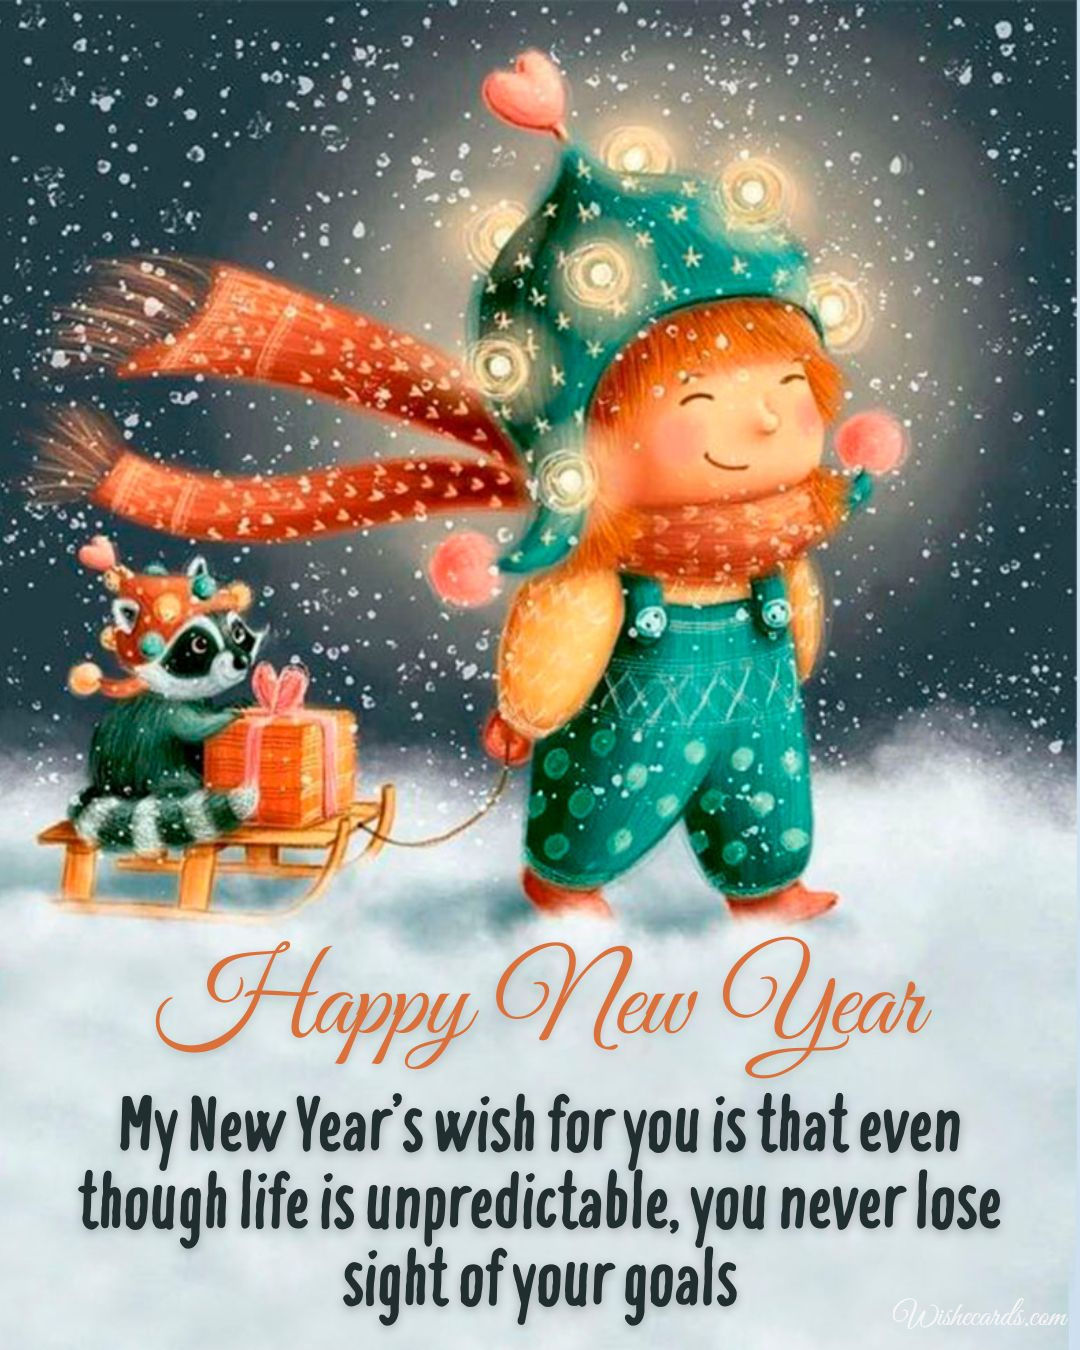 Happy New Year Image and Quote